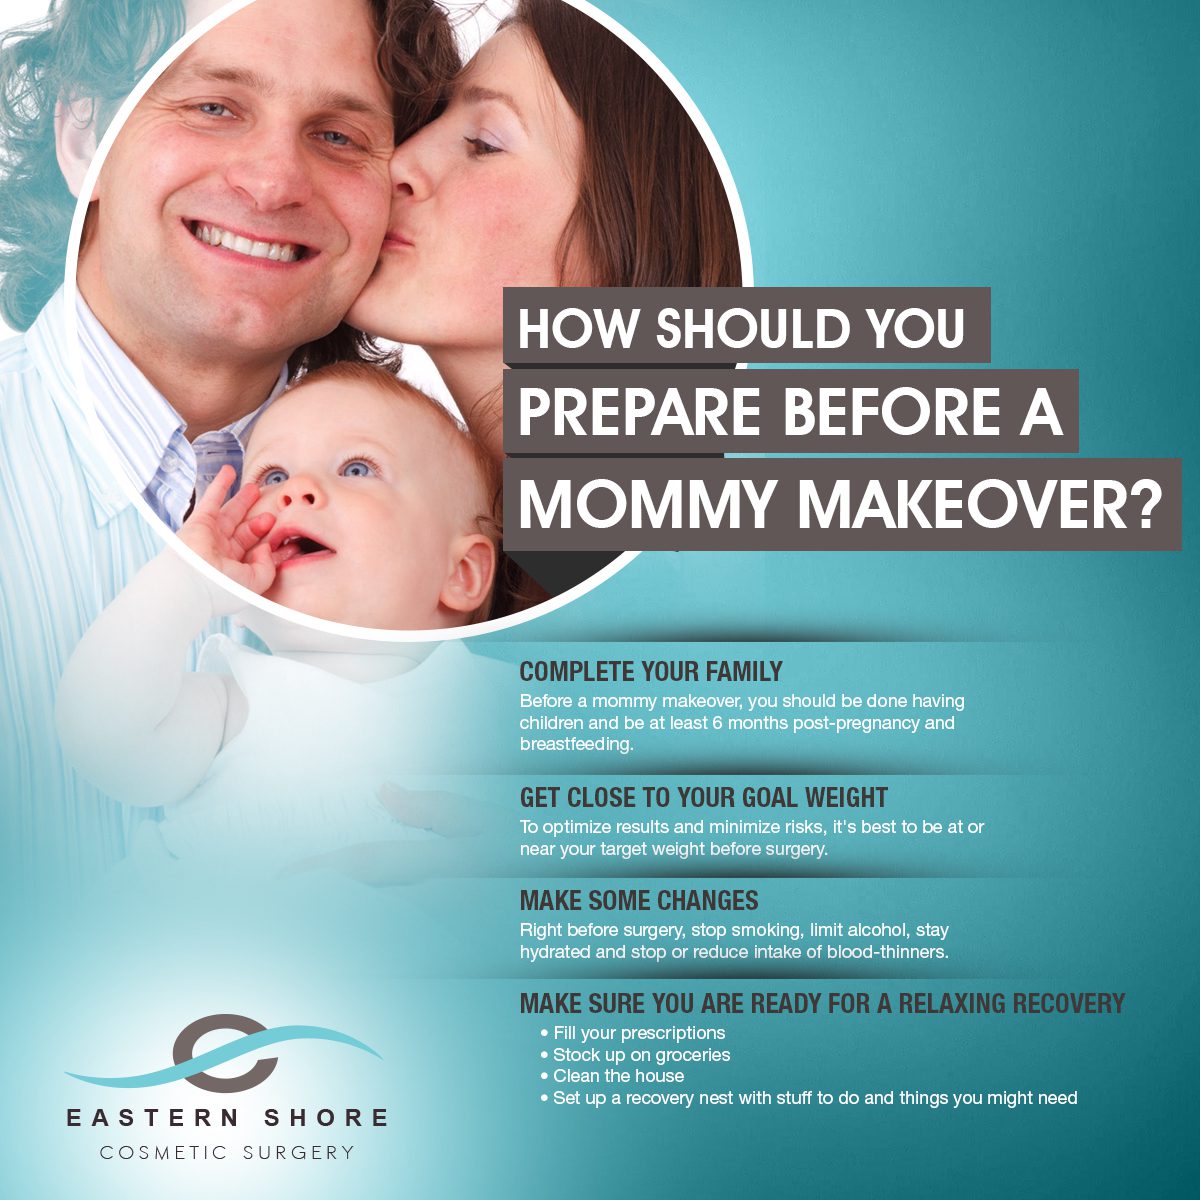 How Should You Prepare Before A Mommy Makeover? [Infographic] img 1